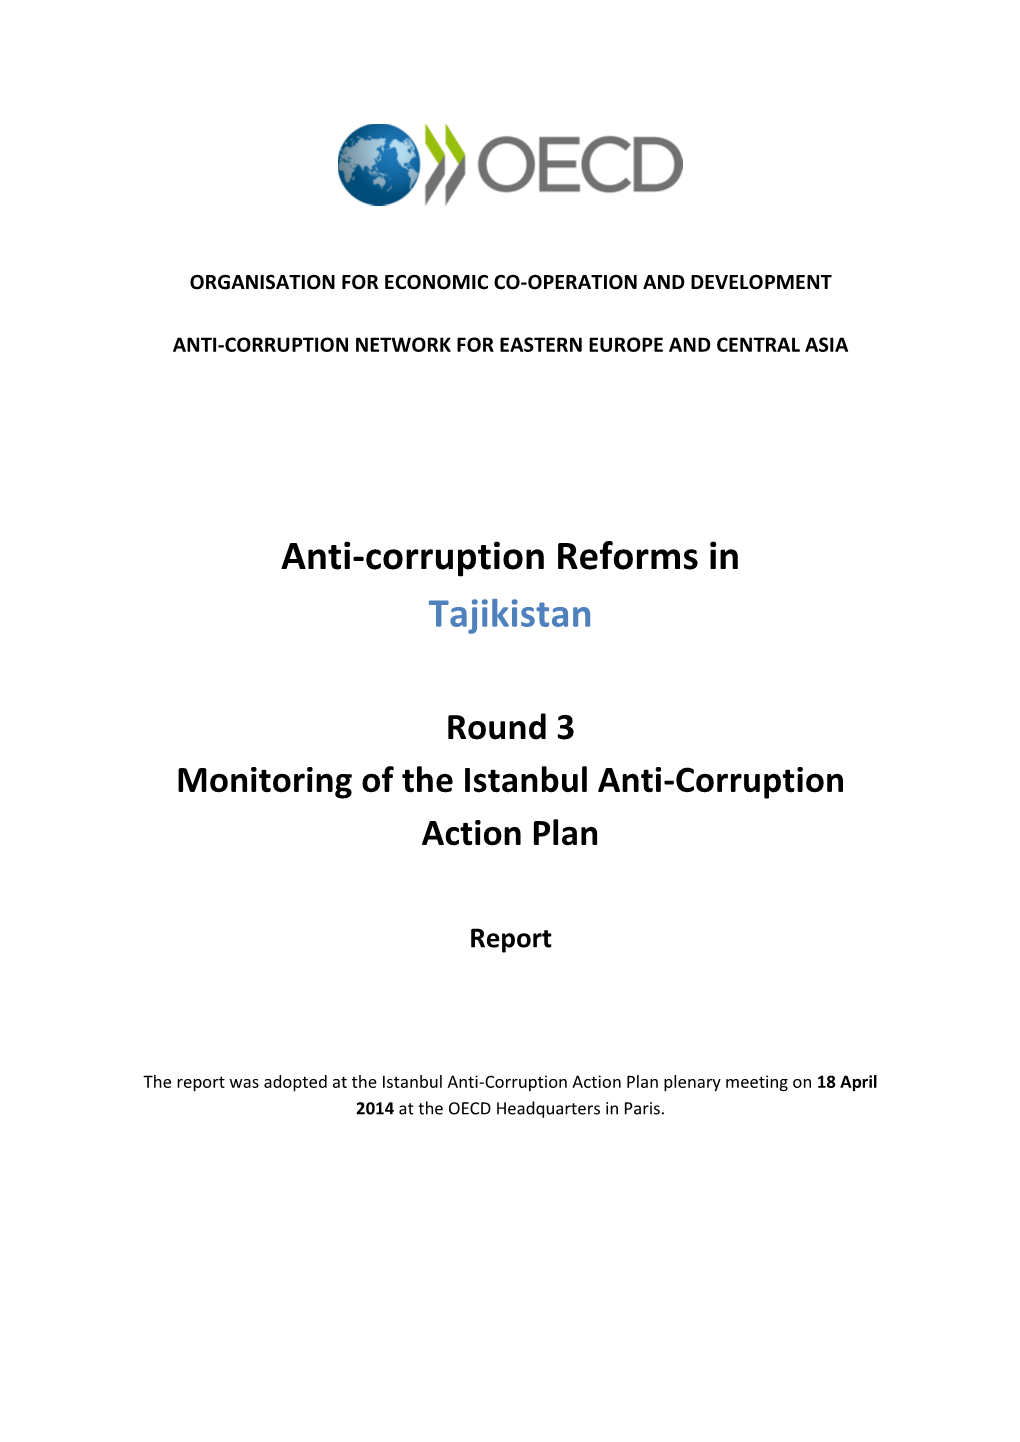 OECD Anti-Corruption Network for Eastern Europe and Central Asia (ACN)